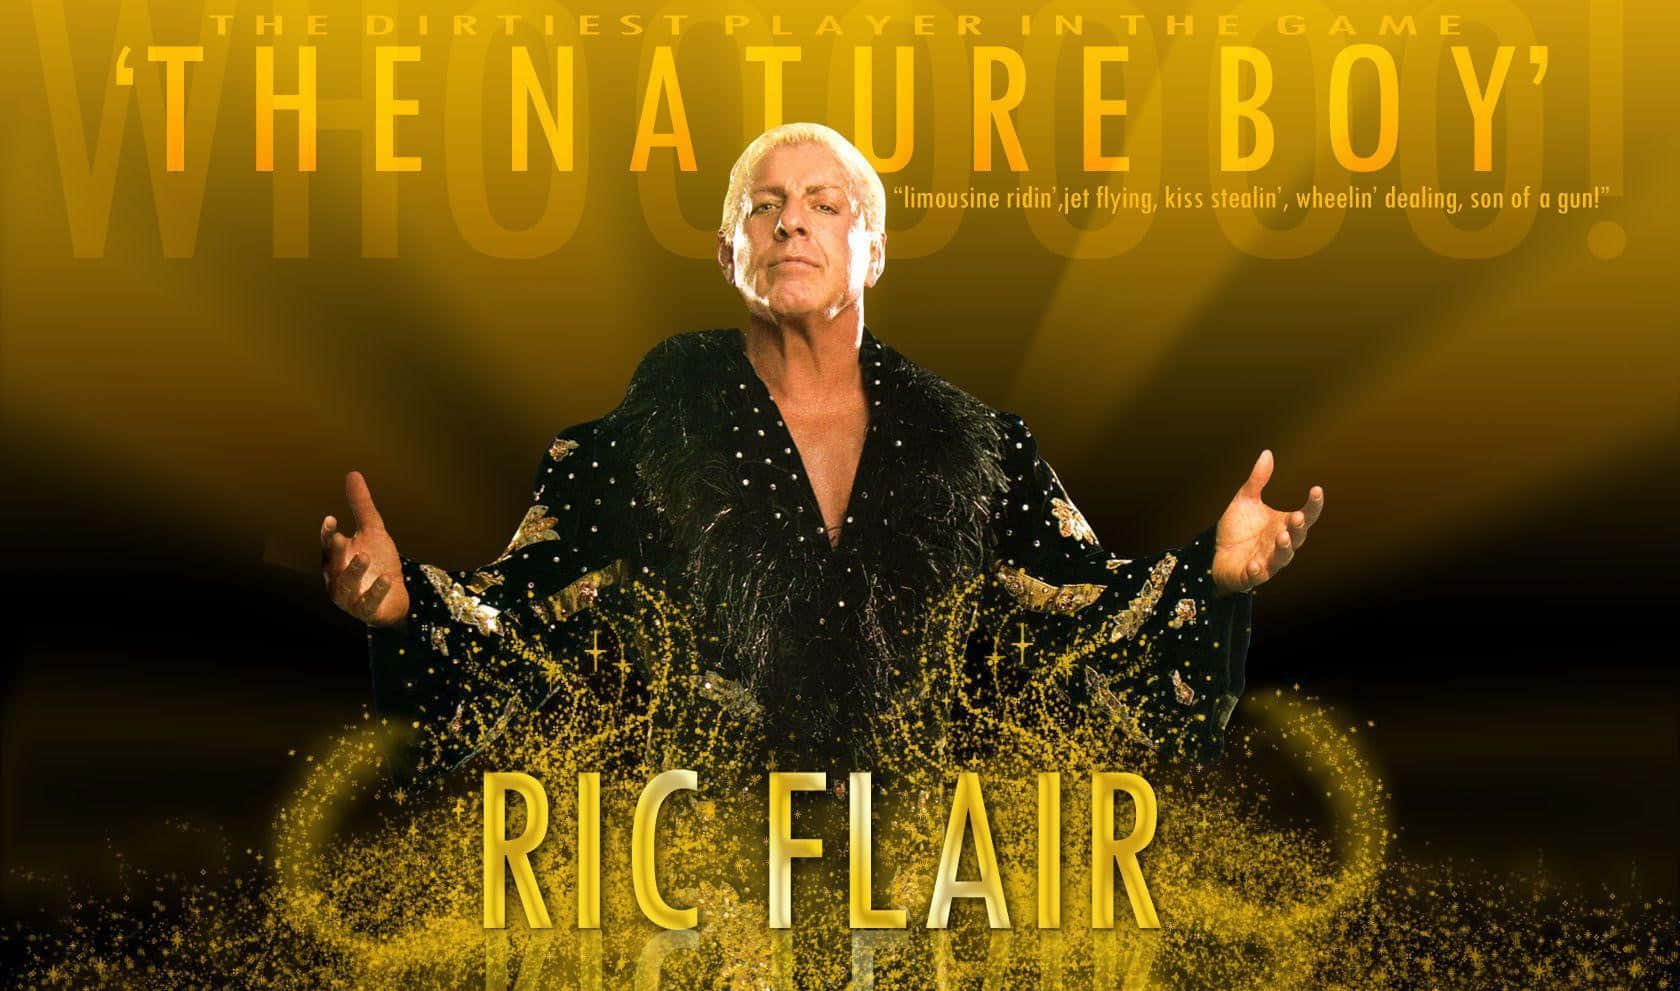 Wrestling Icon Ric Flair, 